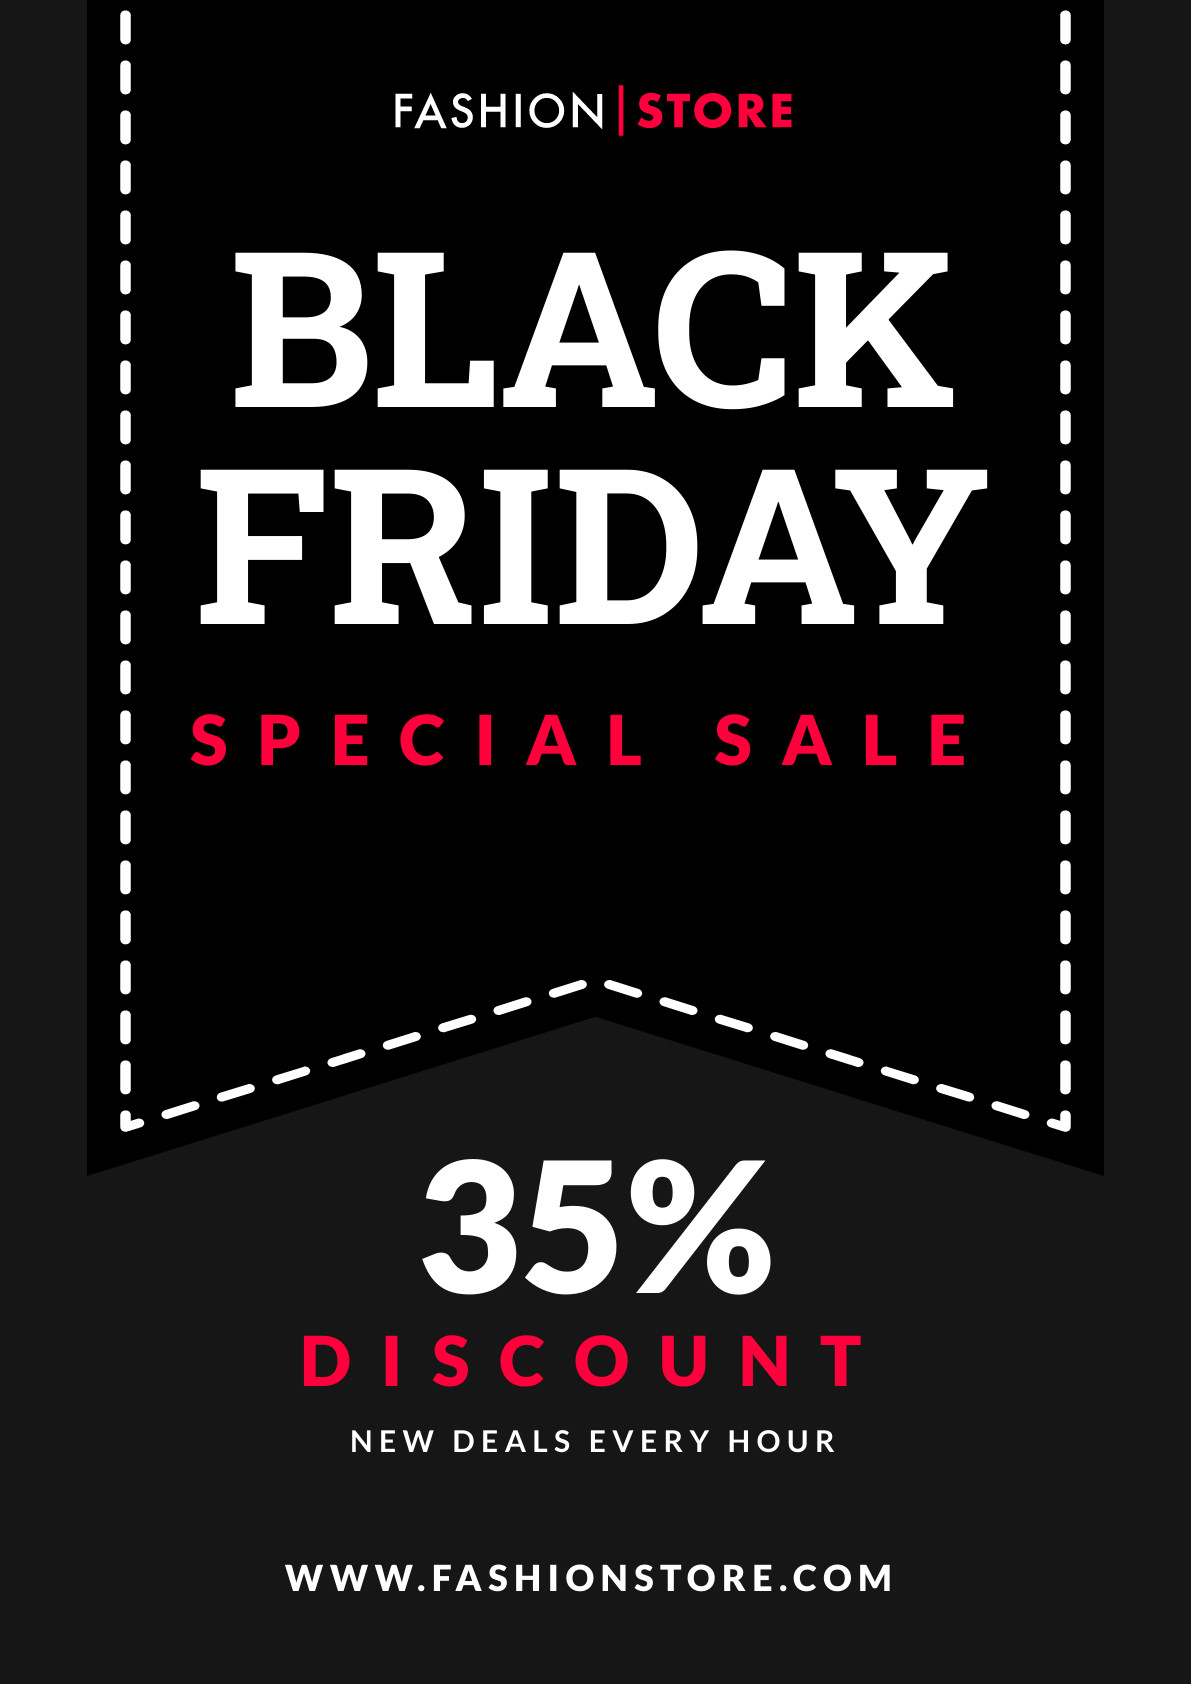 Black Friday Fashion Store Special Sale Poster